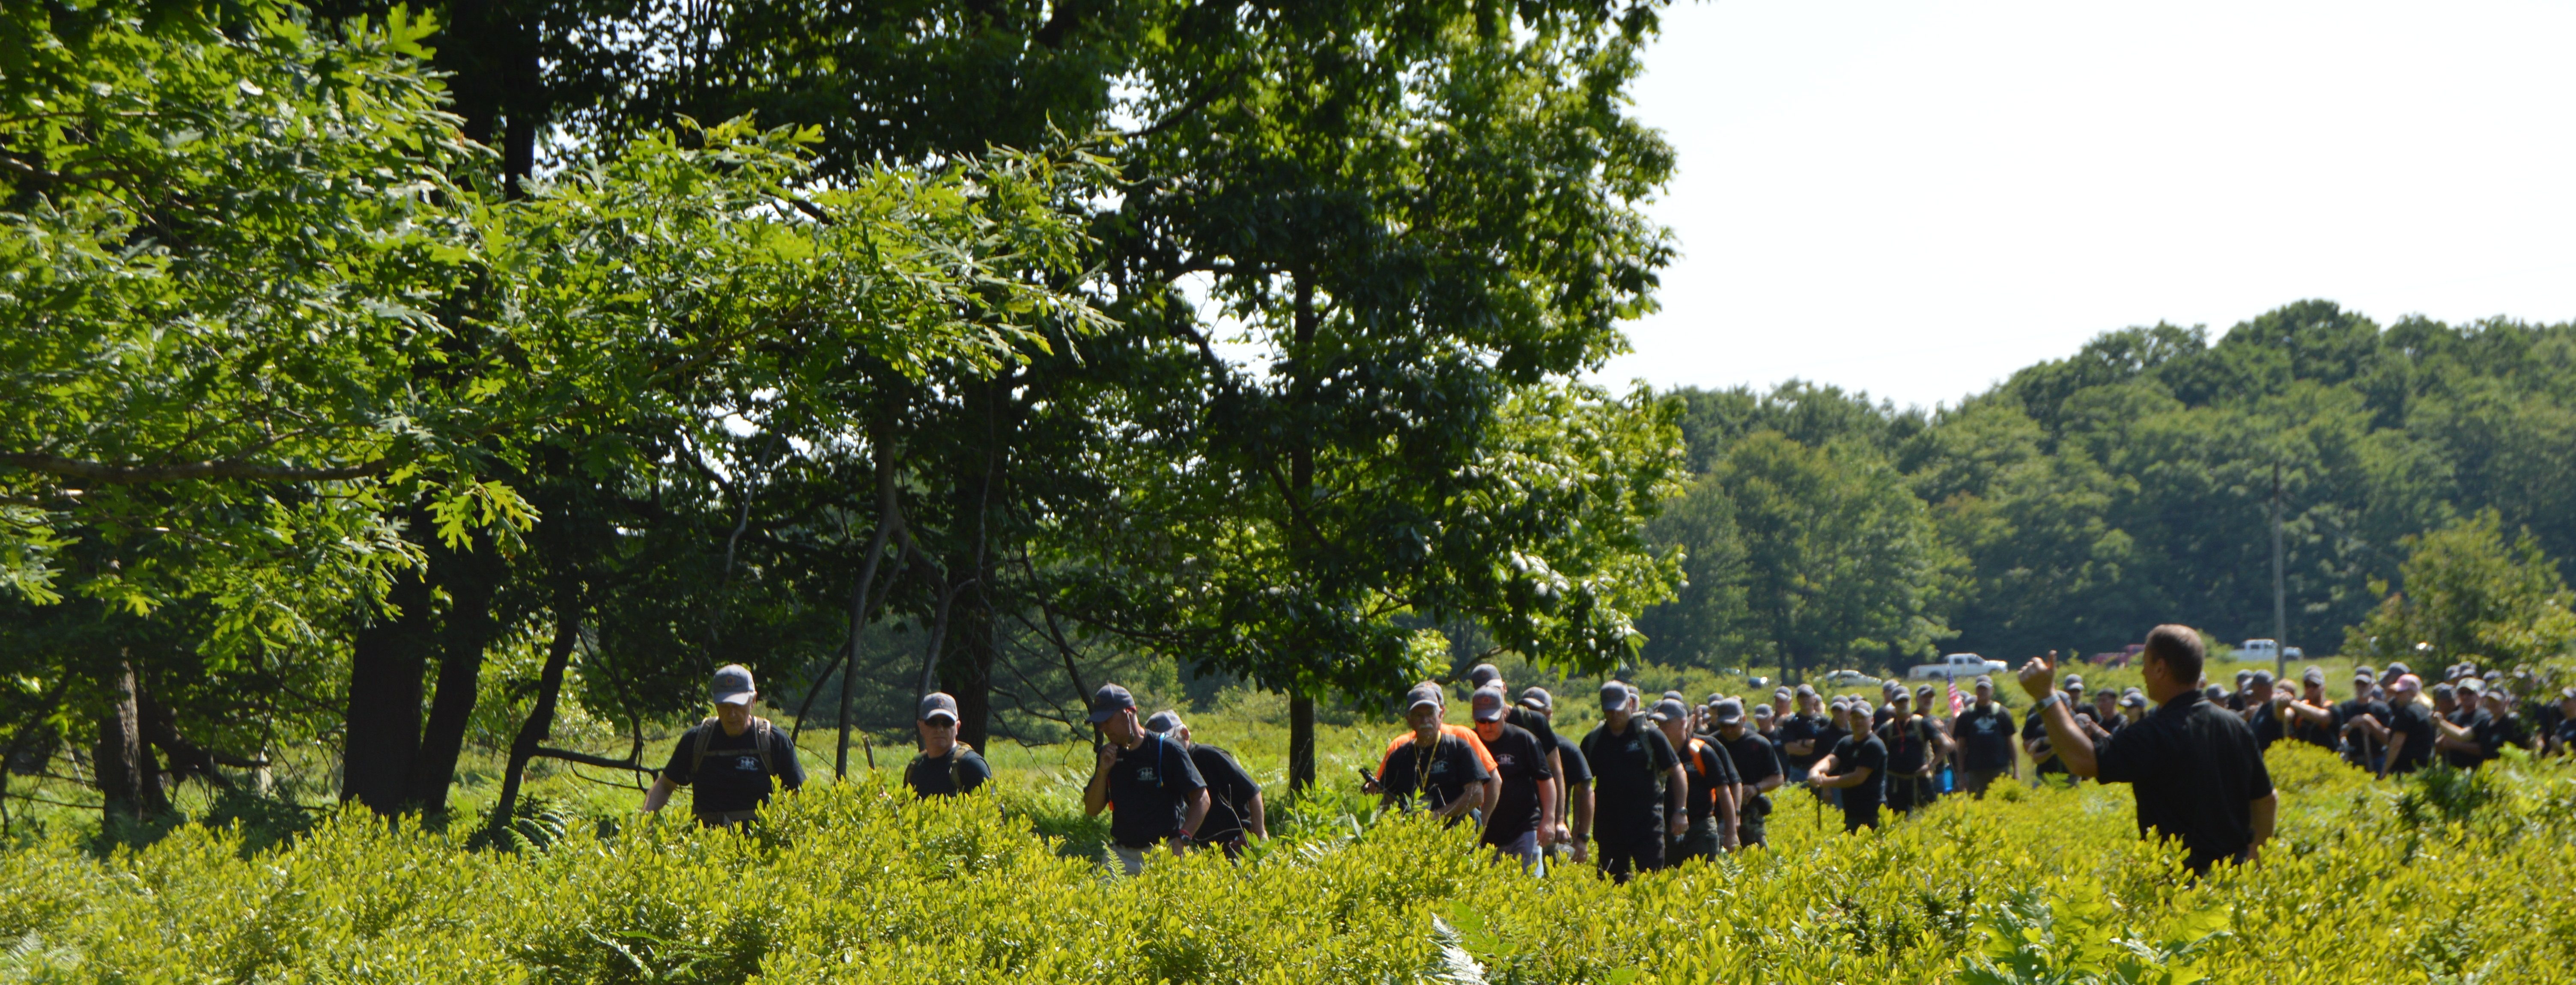 About 187 members of the Clearfield County Sheriff's Posse move through the brush during a mock search exercise Saturday near the Greenwoos Club on the outskirts of Curwensville. The exercise was designed to give the posse members real-life experience of what they will be required to do if they are ever deployed for an actual search. Sheriff Wes Thurston said the exercise was a success and the missing person, a 7-year-old girl, was located within 30 minutes of the start of the search. (Photo by Kimberly Finnigan)